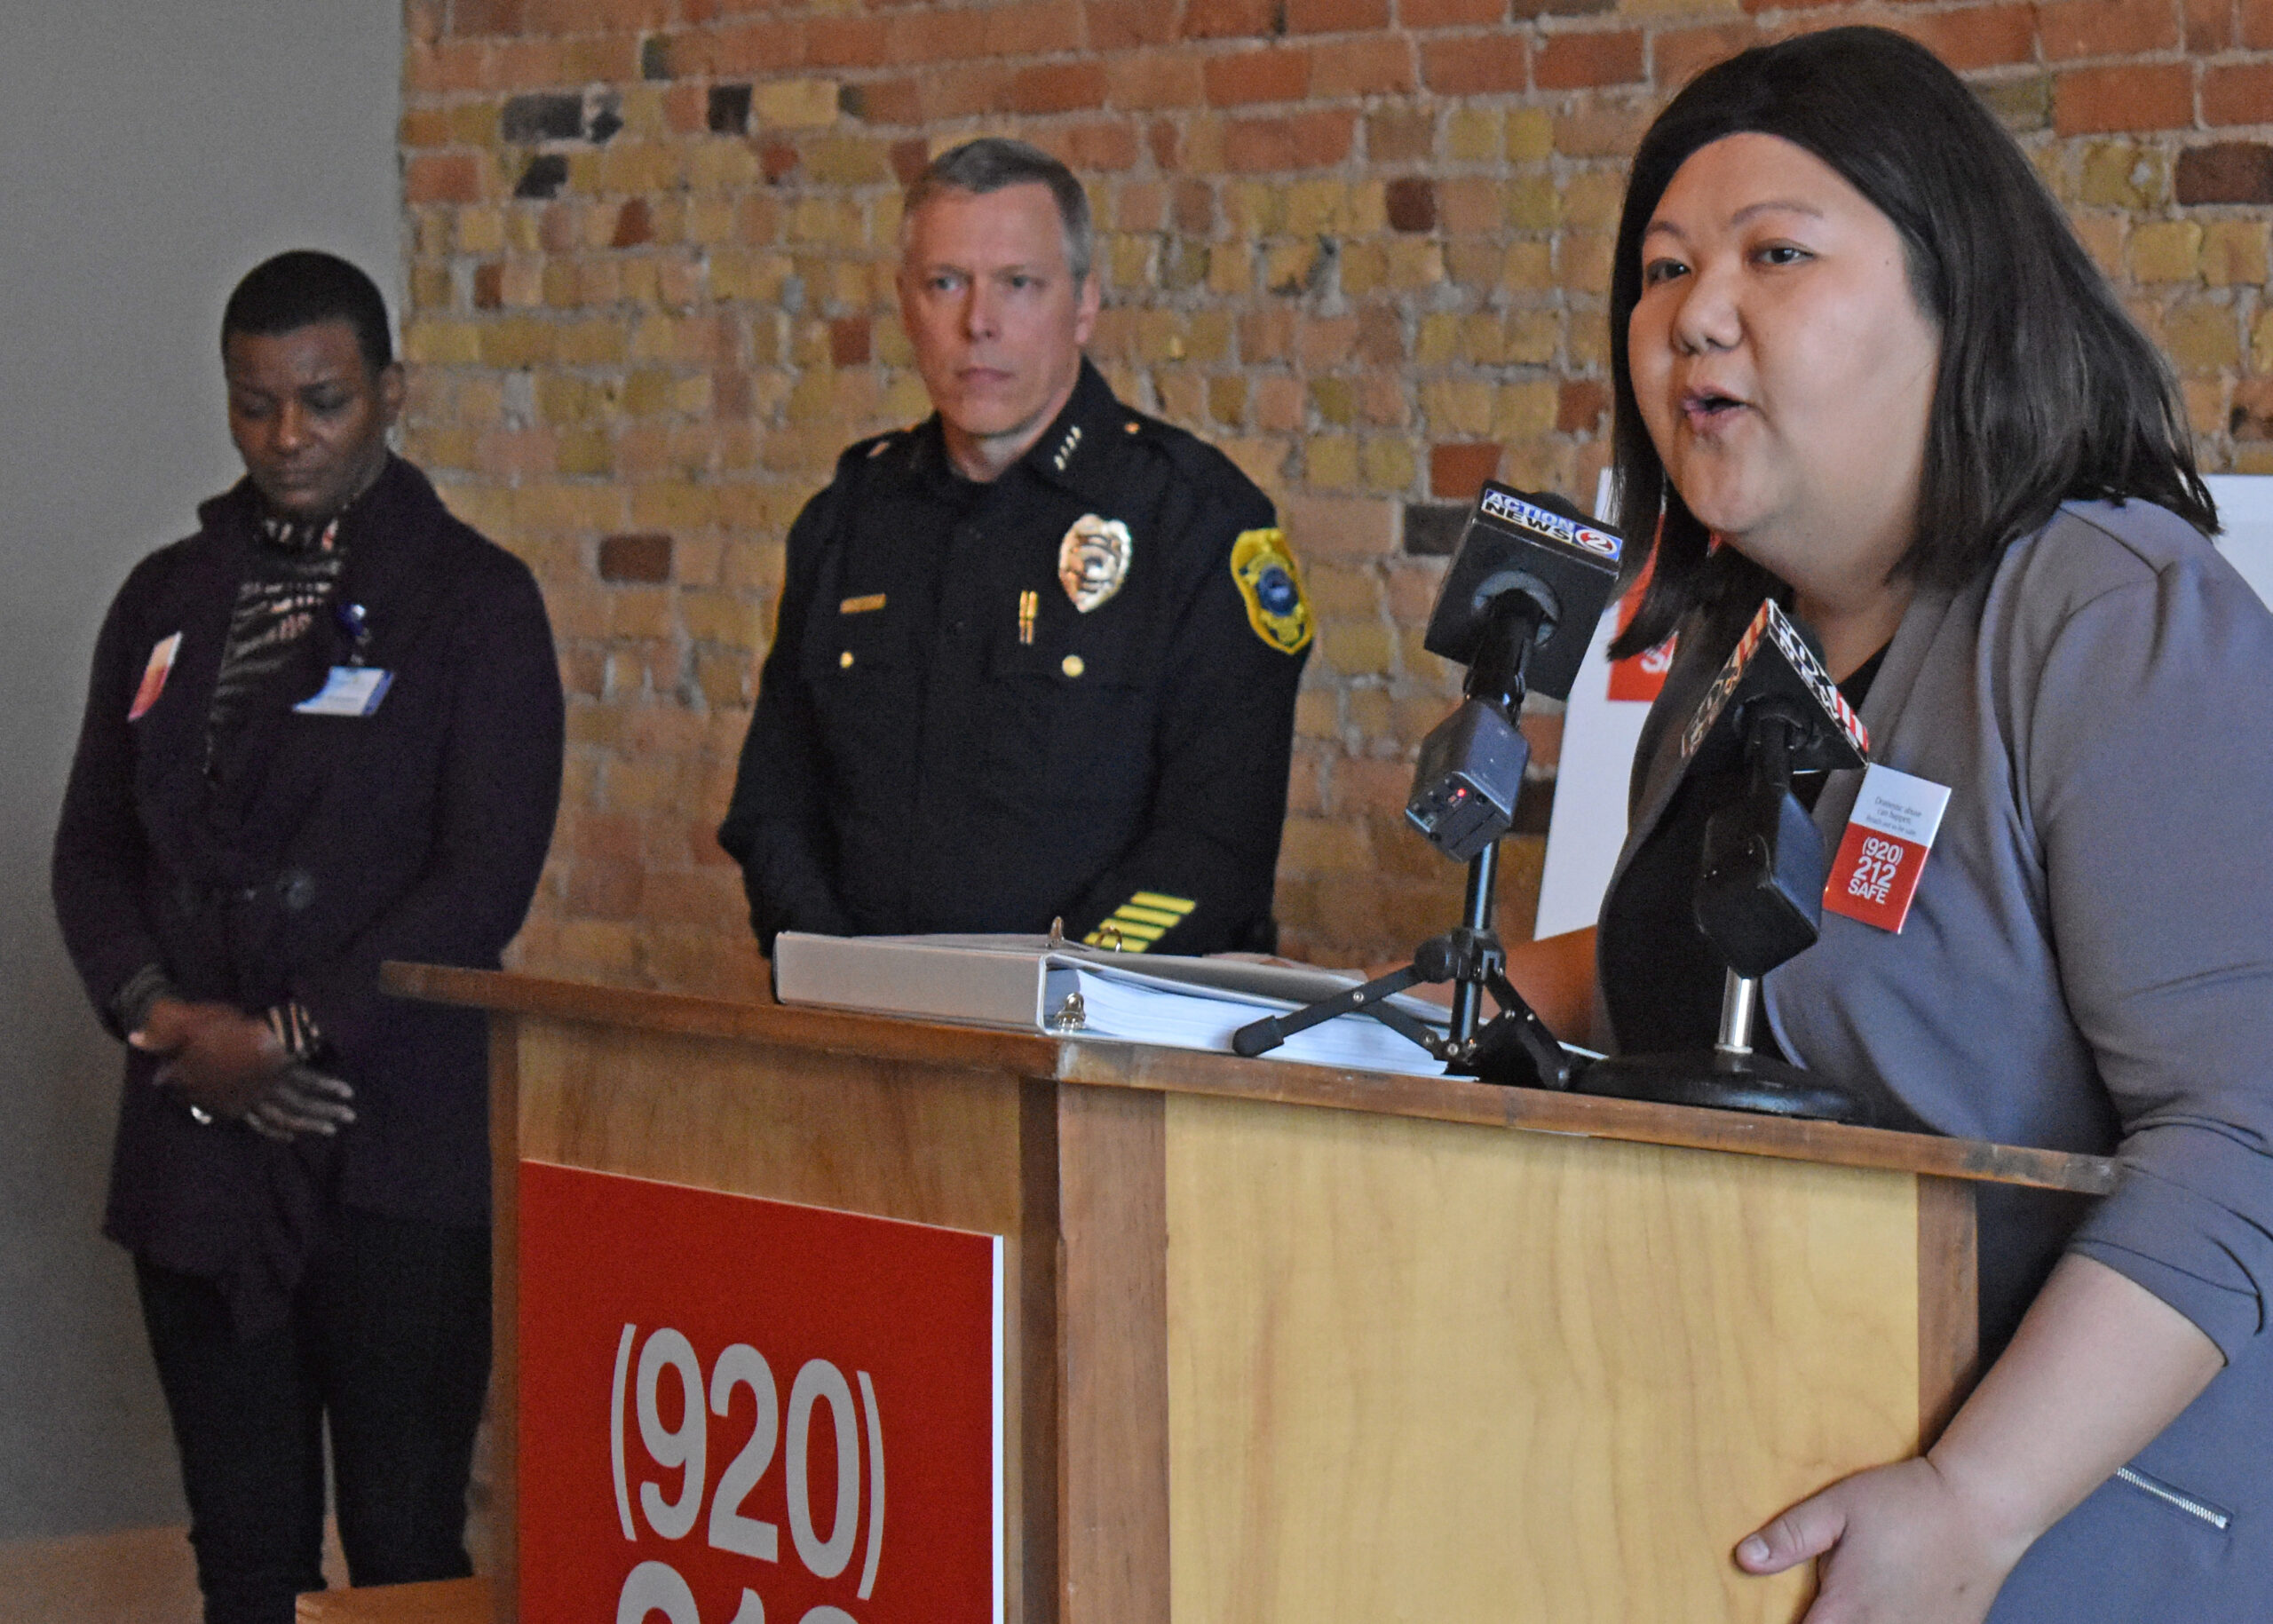 Golden House Executive Director Cheeia Lo speaks during a press conference unveiling the "Be Safe Campaign" in De Pere.